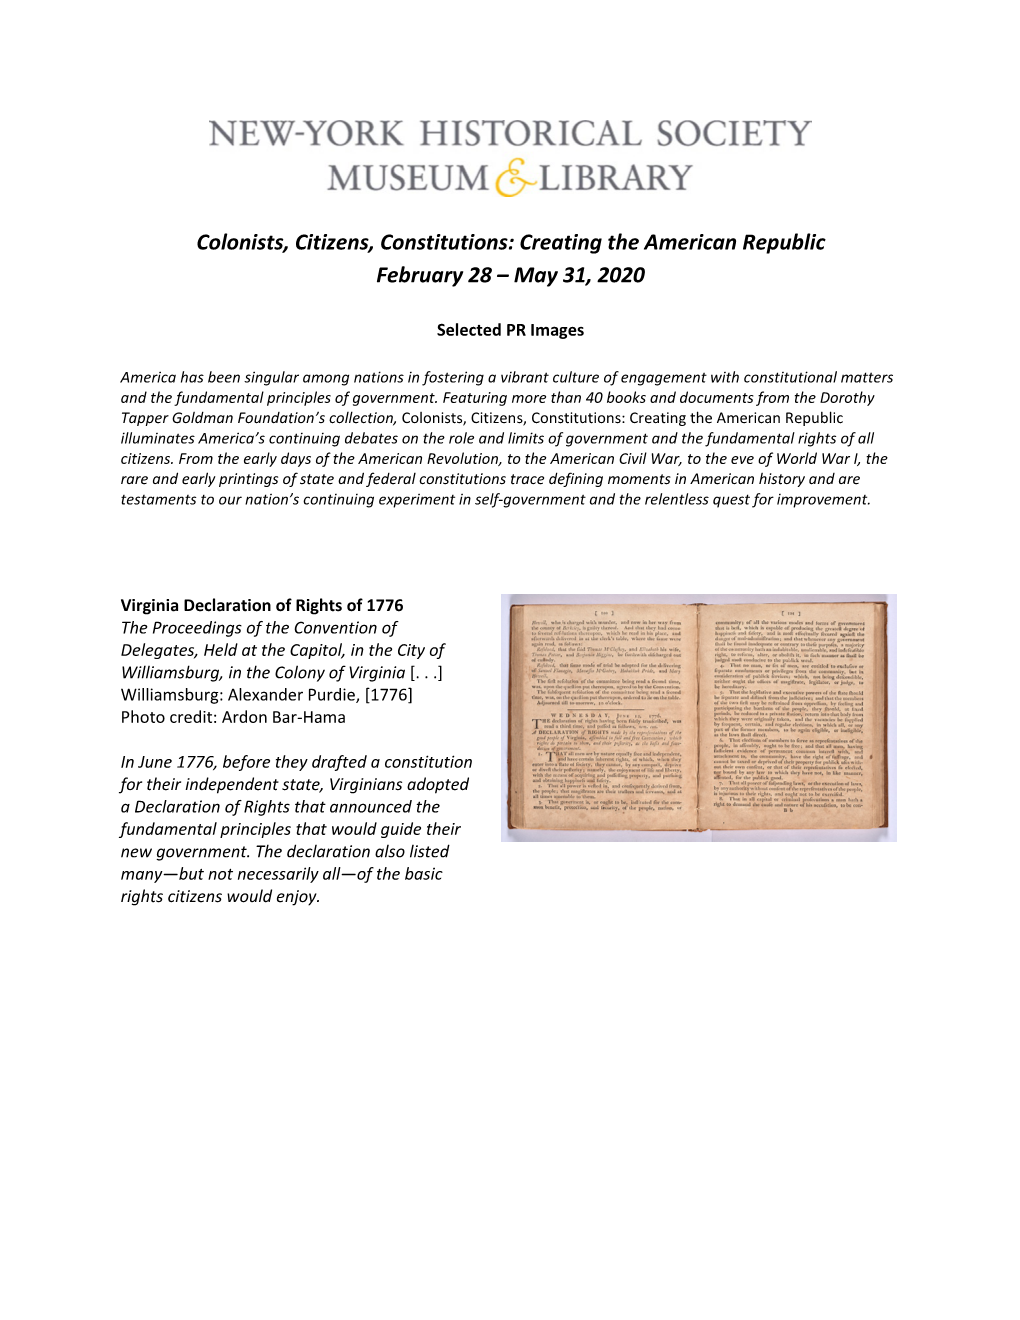 Colonists, Citizens, Constitutions: Creating the American Republic February 28 – May 31, 2020